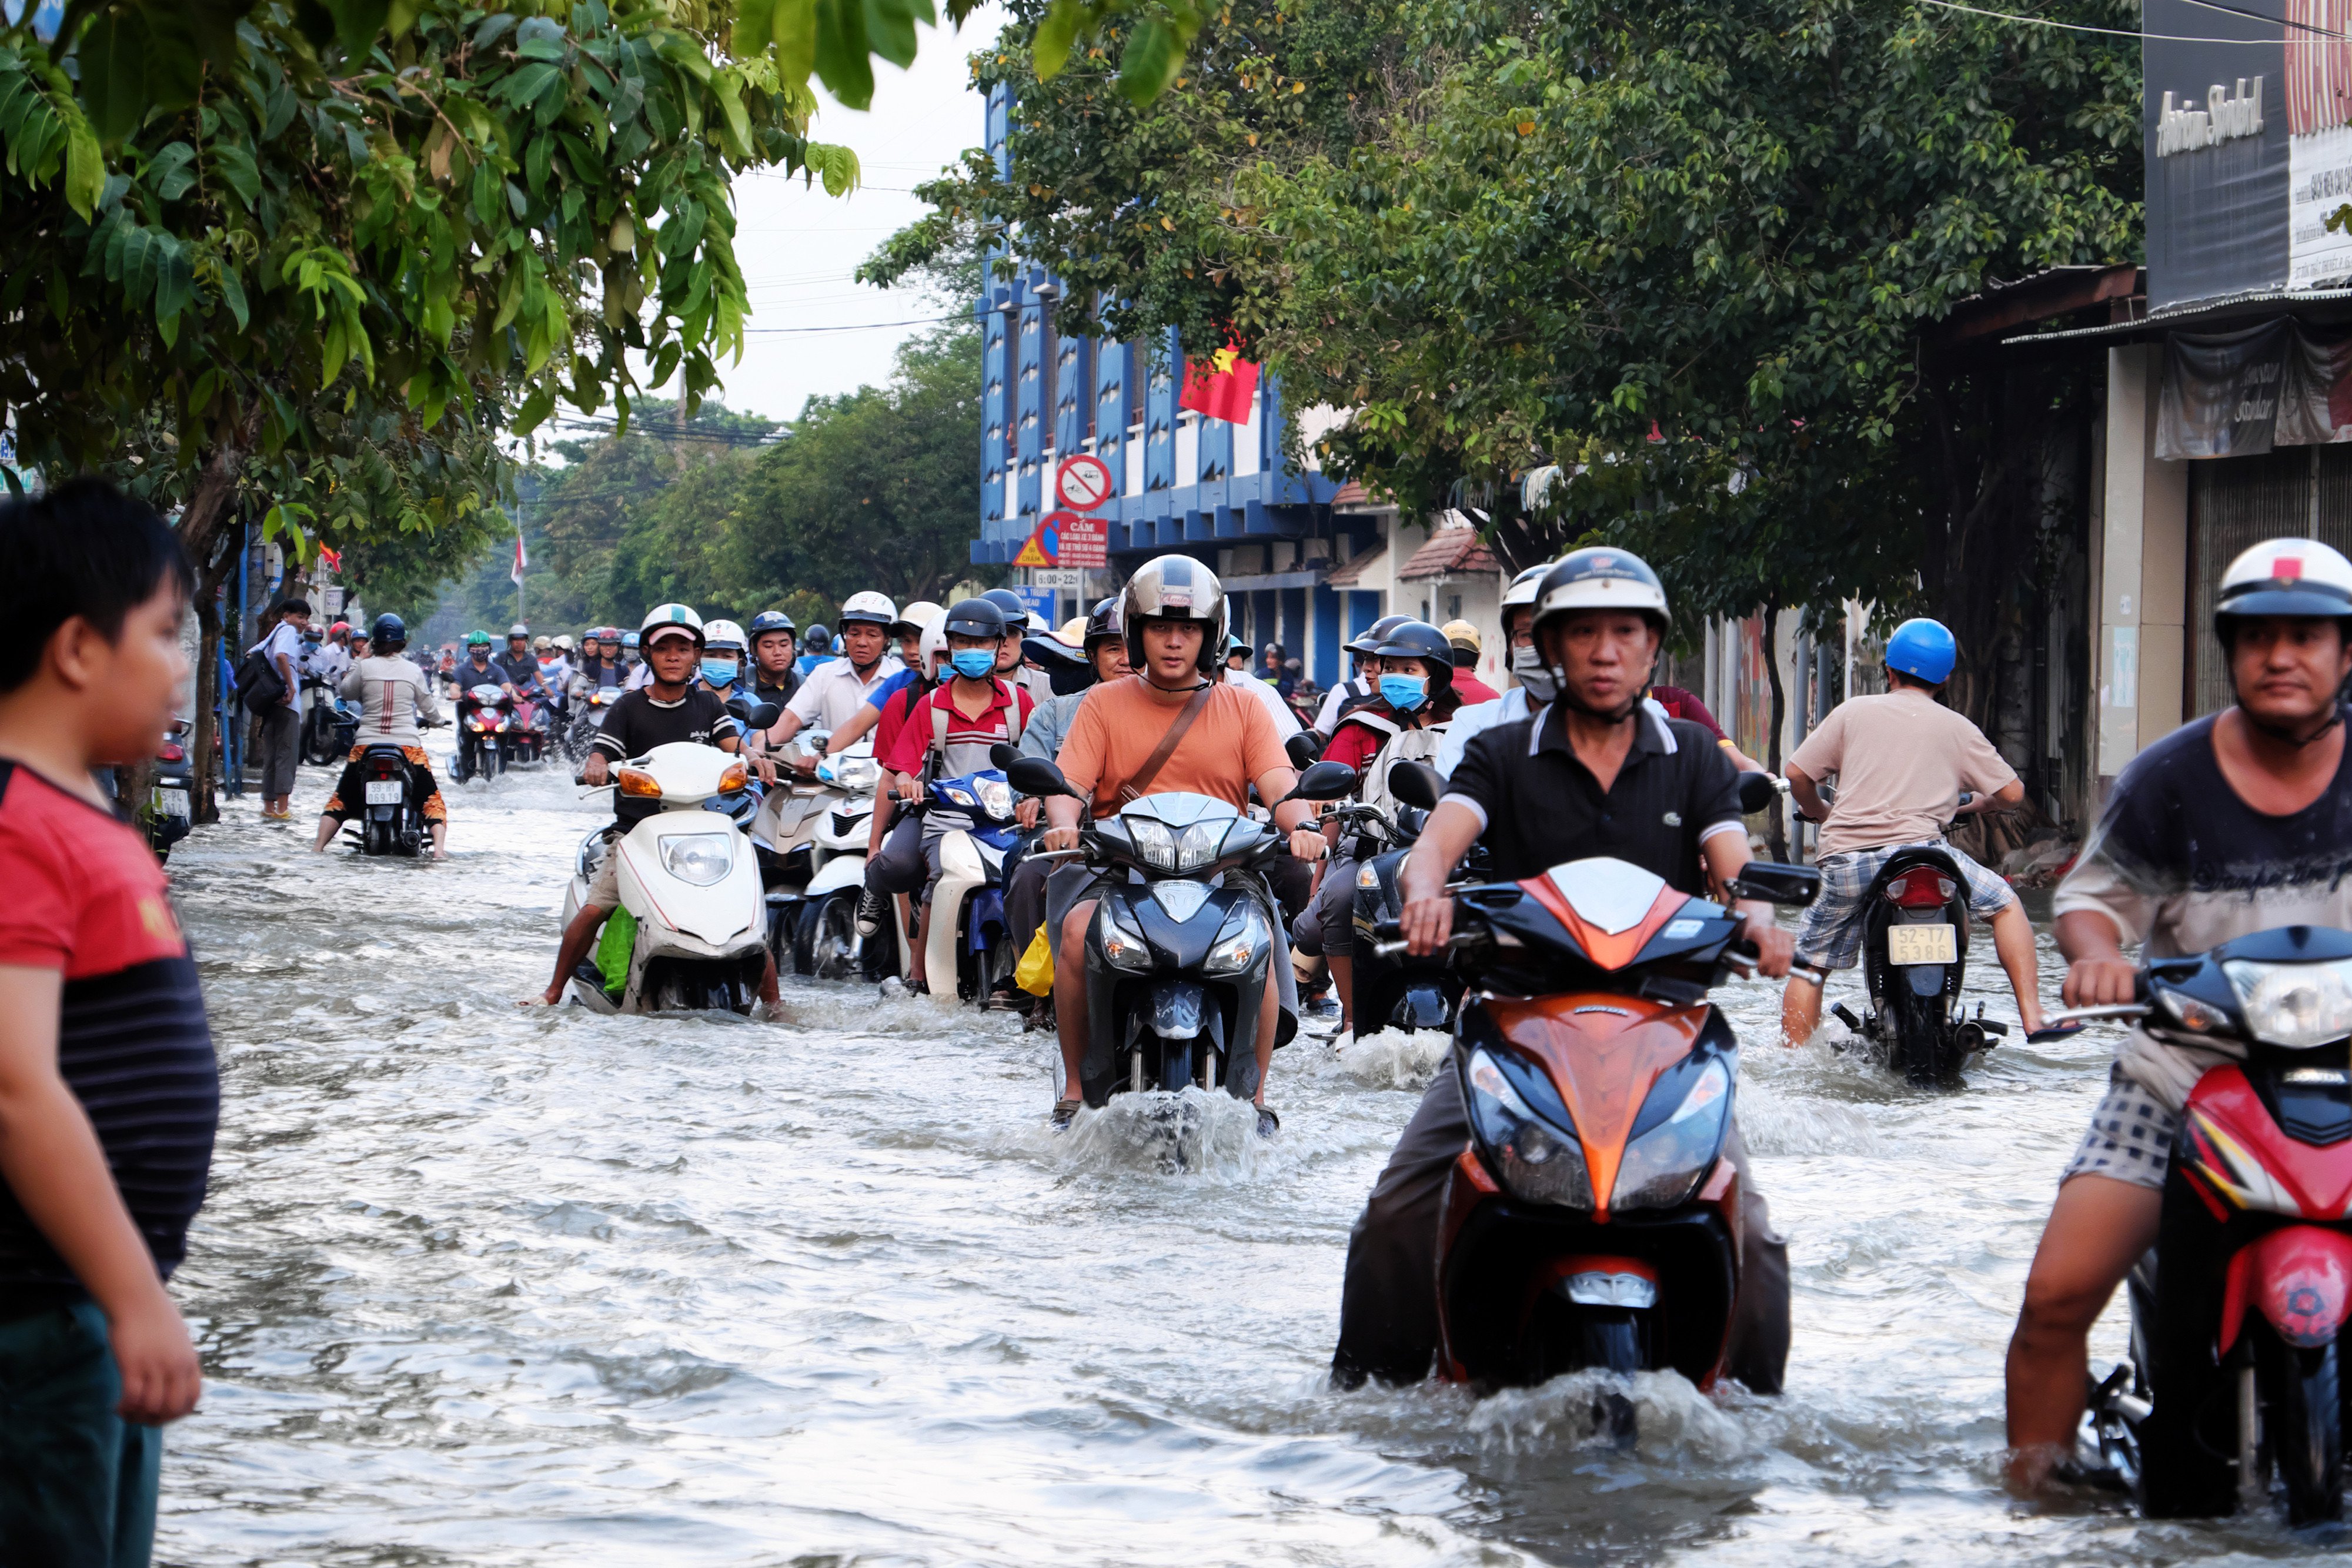 People ride mopeds and motorcycles through a flooded street in Ho Chi Minh City. Photo: Shutterstock